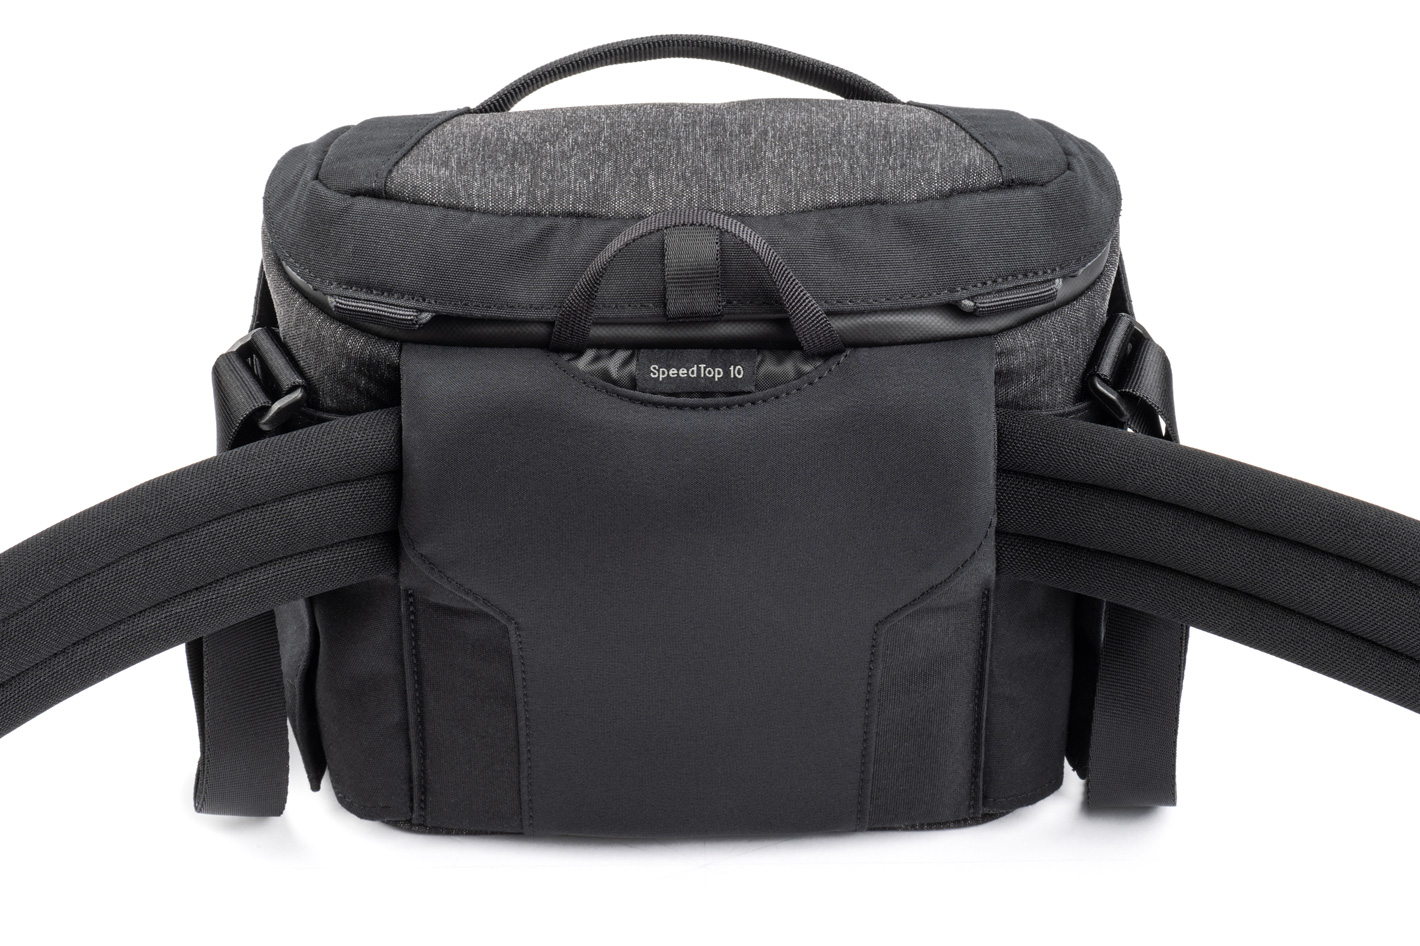 Think Tank Photo announces the new SpeedTop camera bags